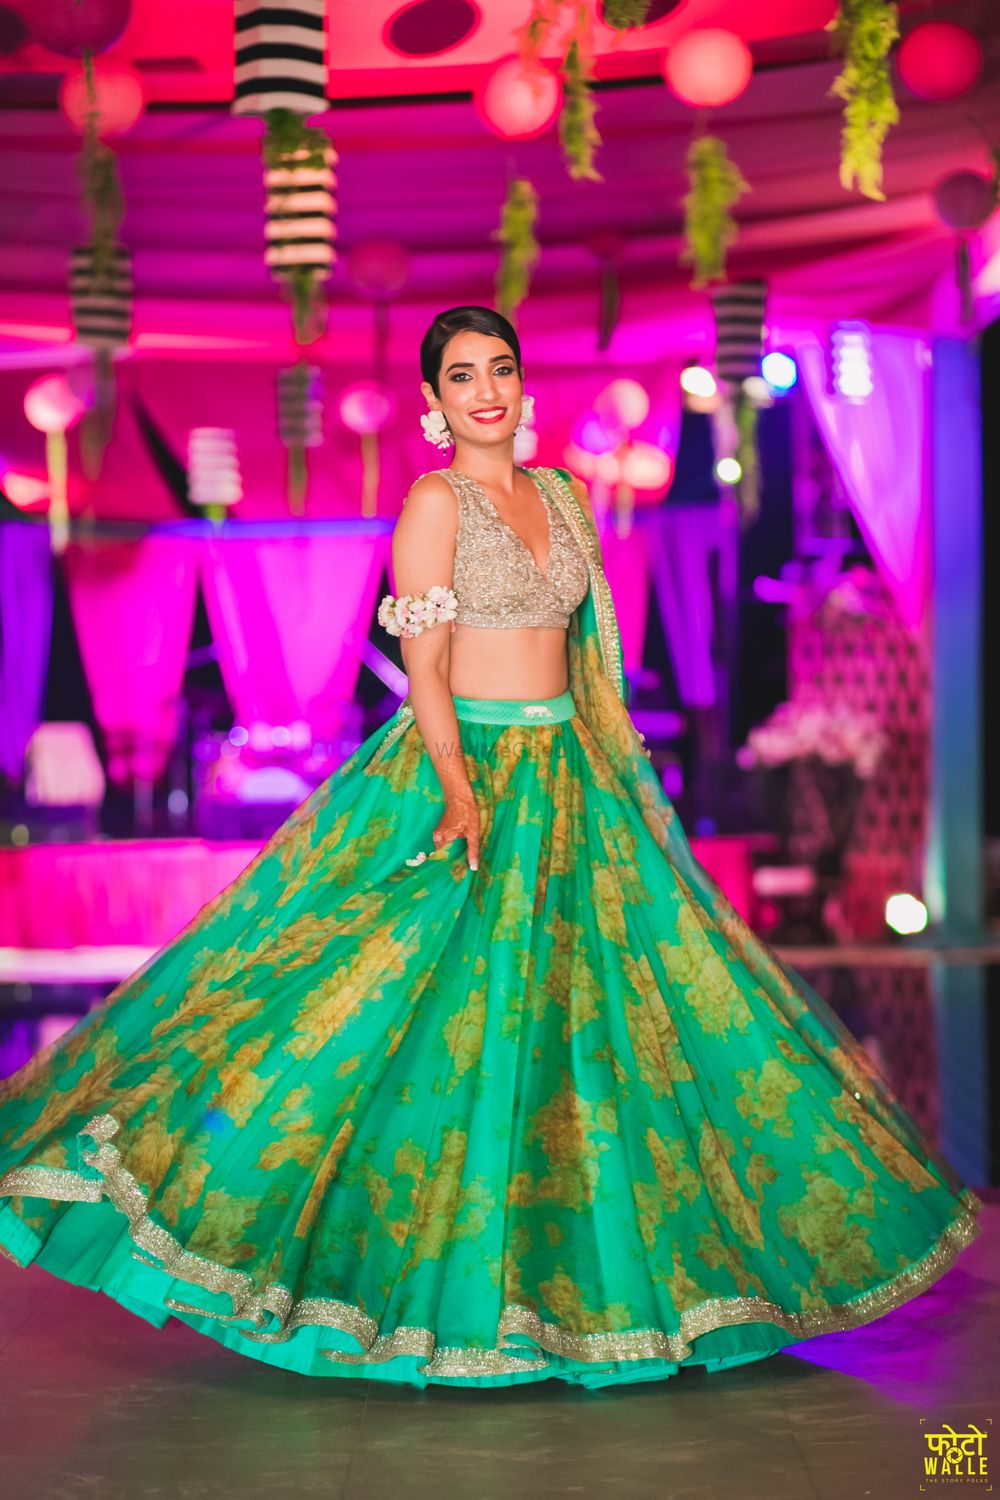 Photo of The bride twirling in a beautiful green floral lehenga and a silver blouse